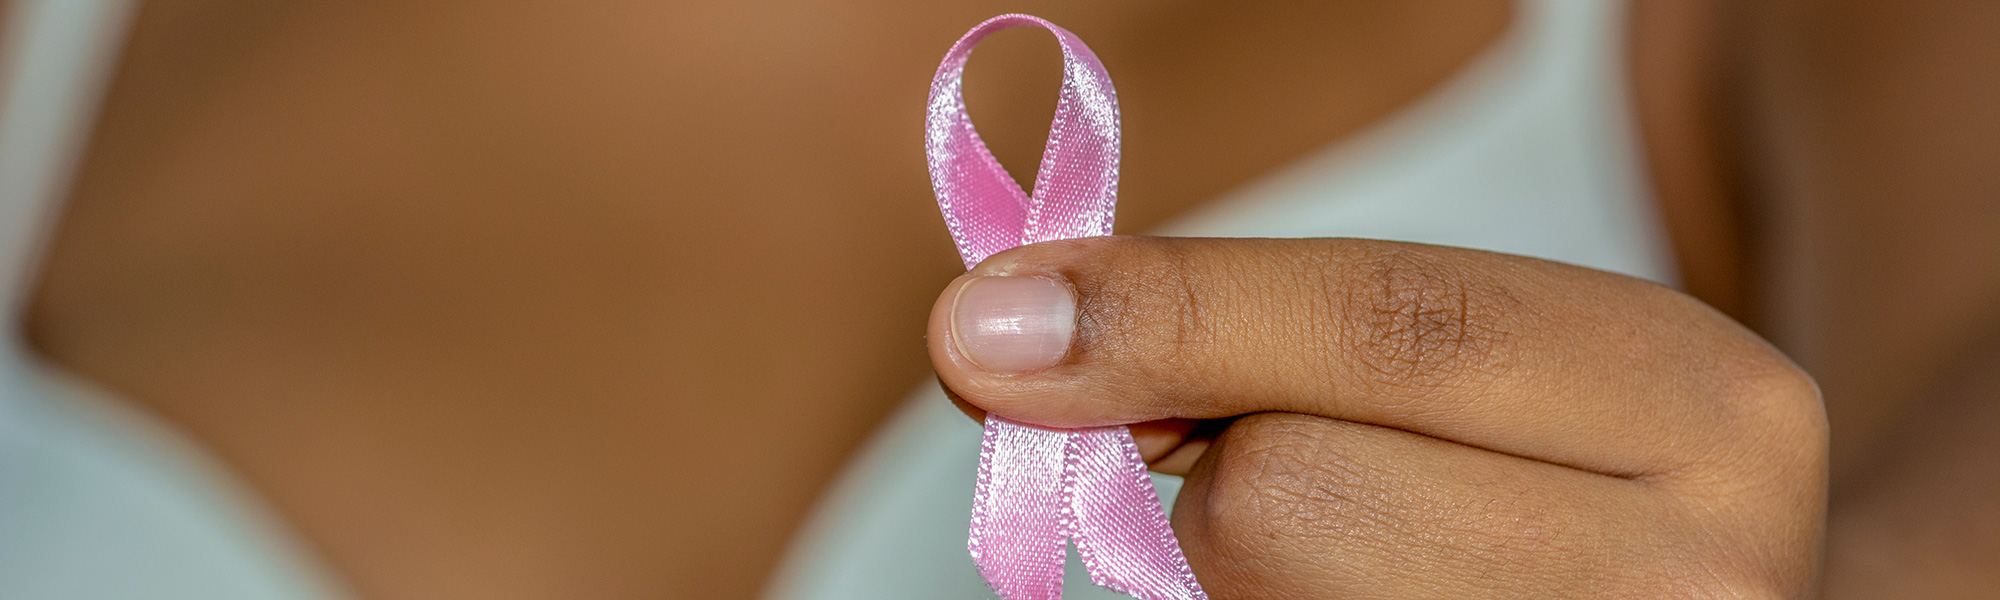 Woman holding out a breast cancer awareness ribbon